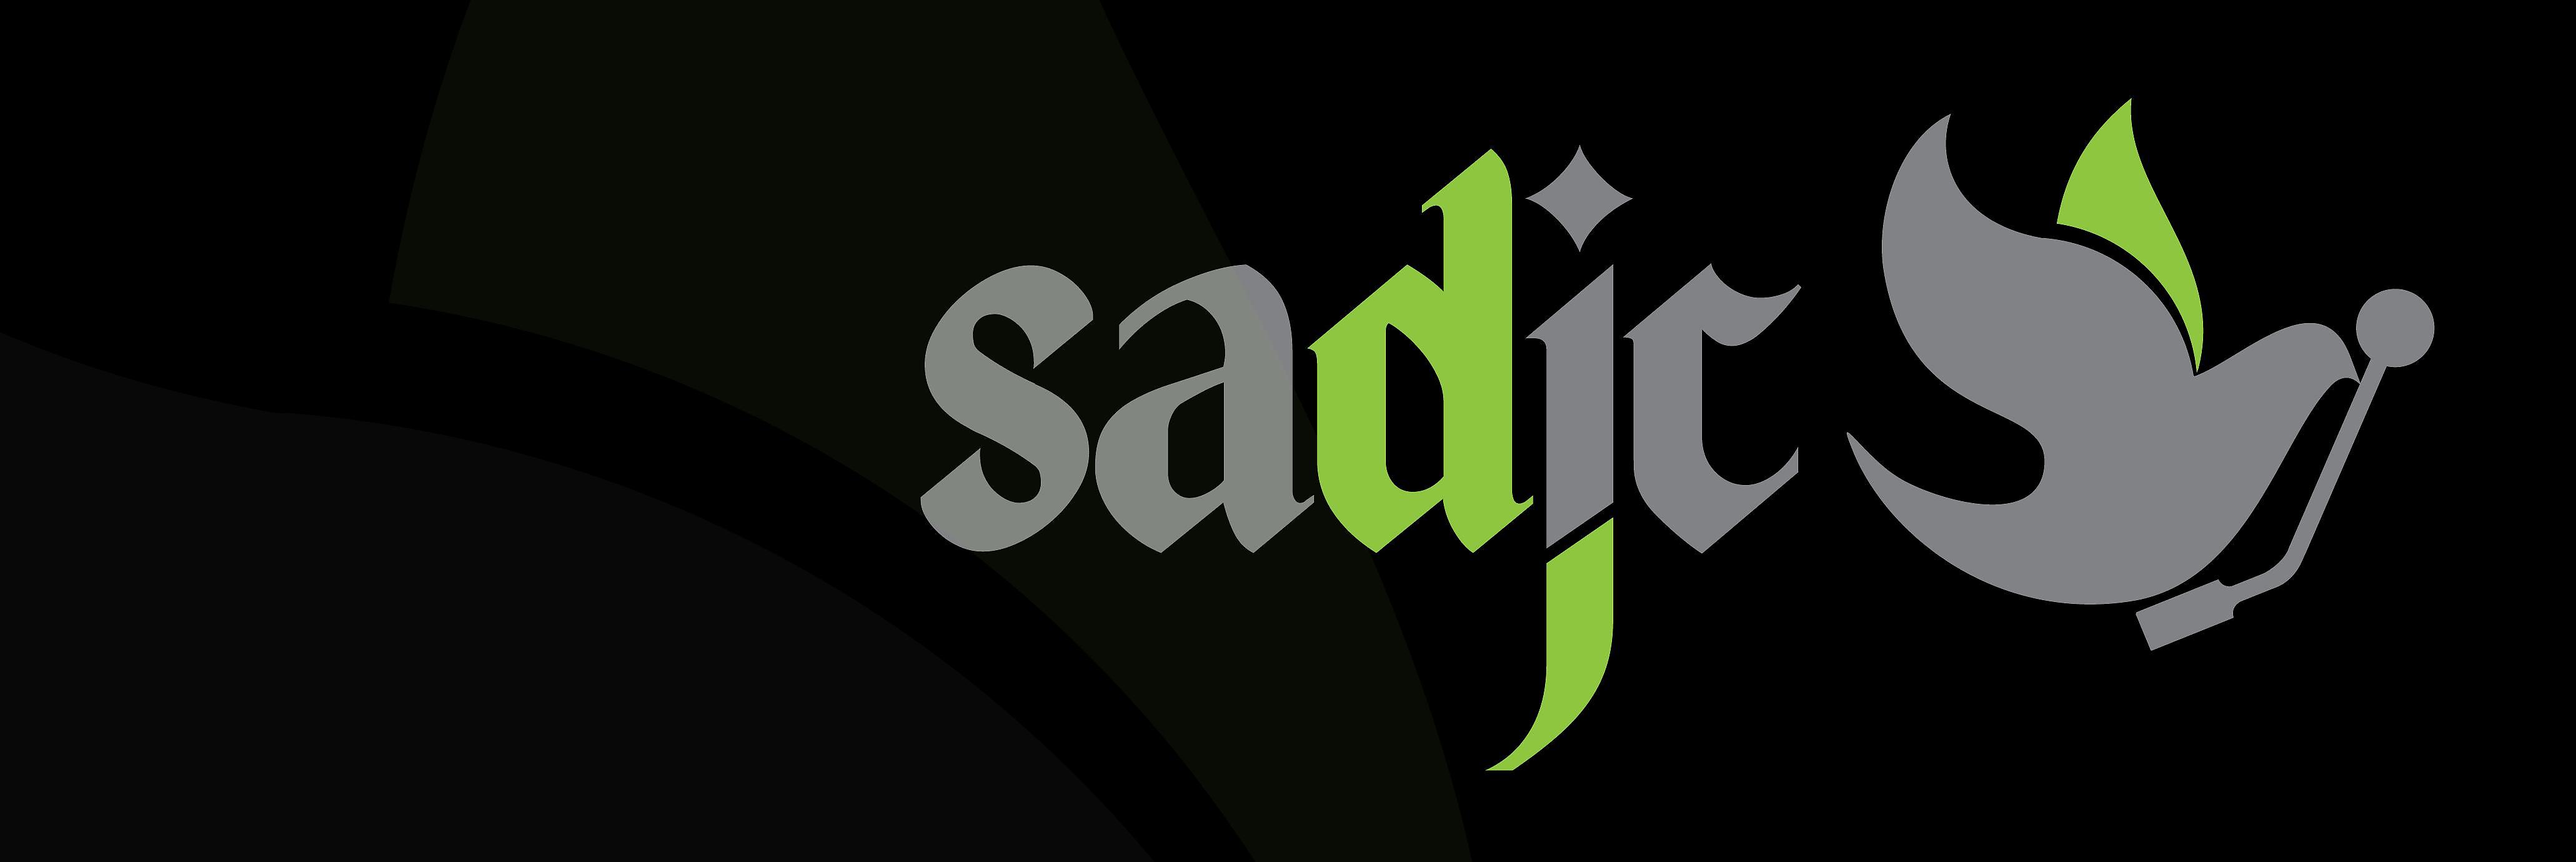 Sadic Backgrounds, Compatible - PC, Mobile, Gadgets| 4123x1379 px